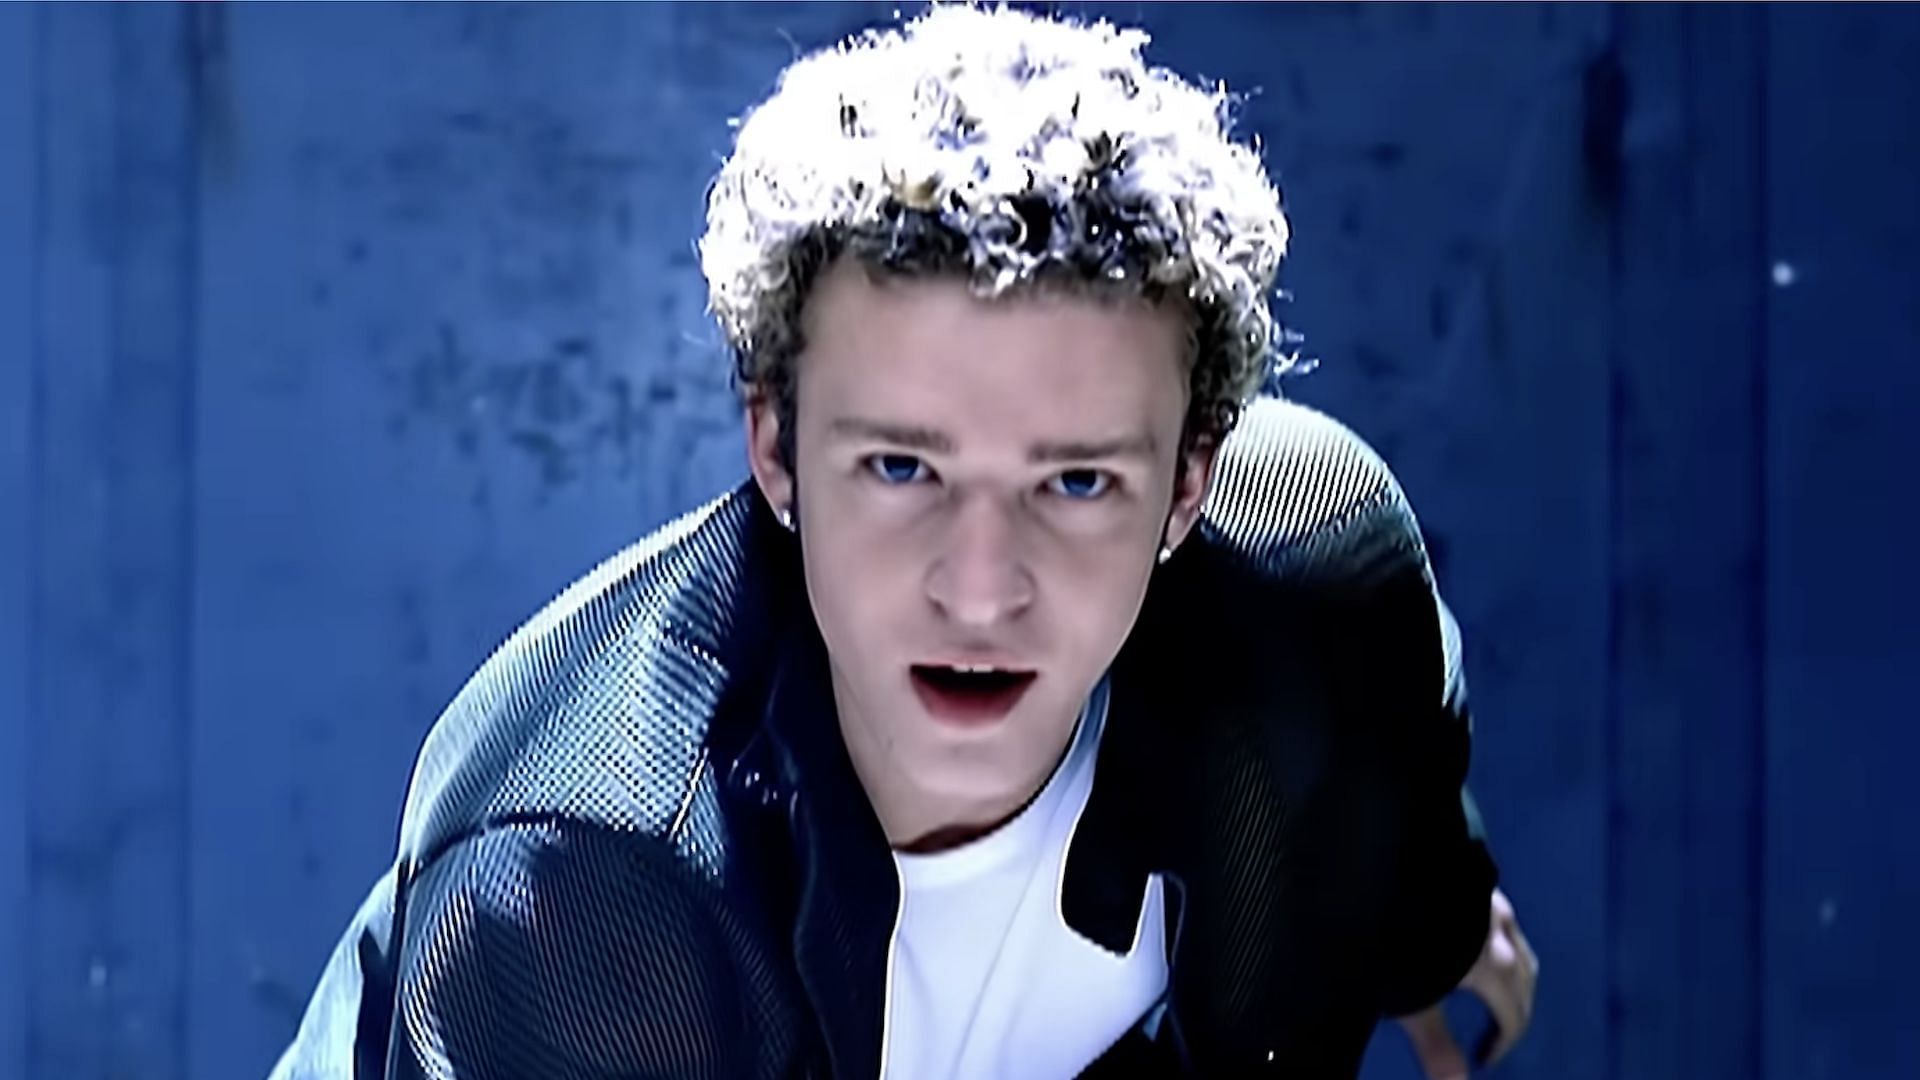 Justin Timberlake in the music video for &#039;Bye Bye Bye&#039; uploaded to YouTube on October 25, 2009 (Image via YouTube/@OfficialNSYNC)